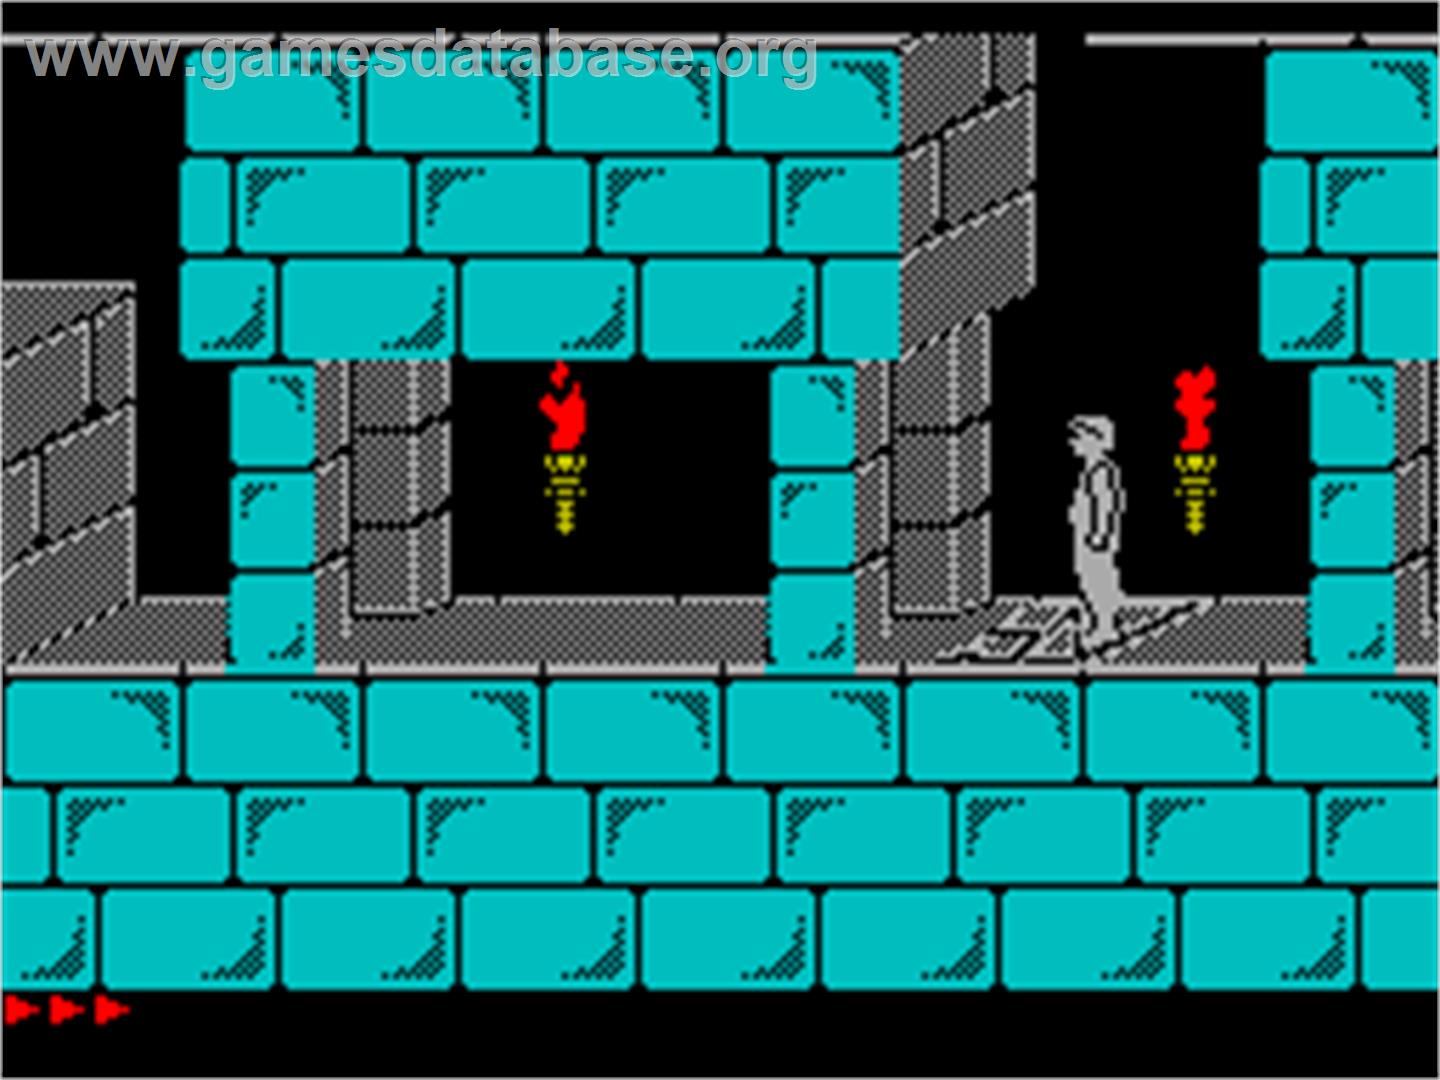 Prince of Persia - Sinclair ZX Spectrum - Artwork - In Game